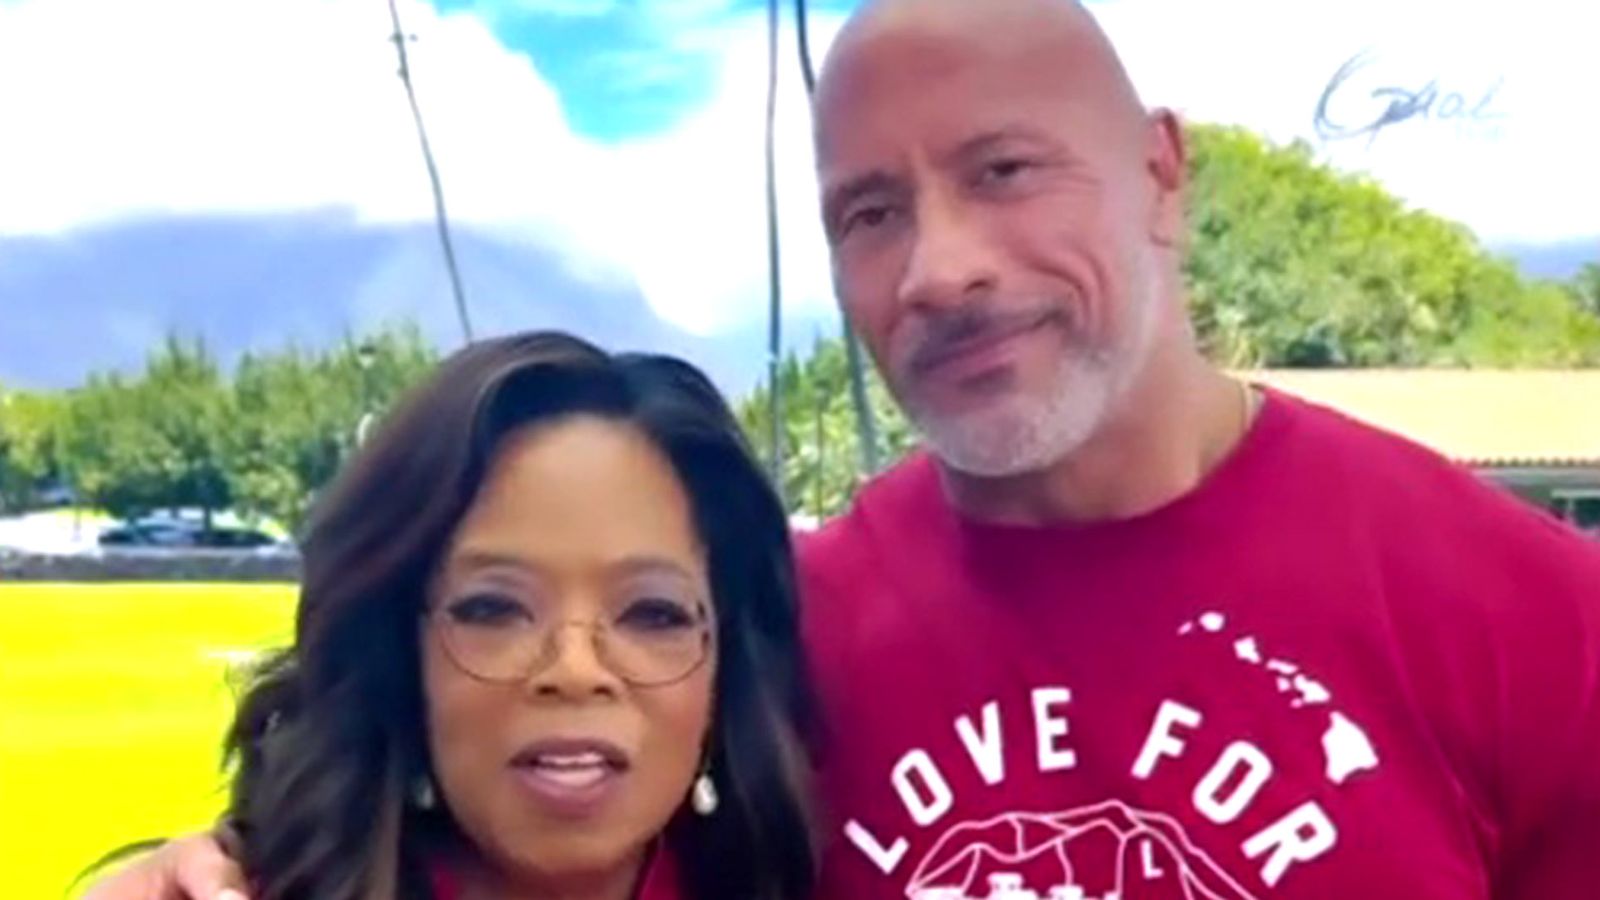 Oprah Winfrey and Dwayne Johnson create Maui relief fund after Hawaii wildfires and kick it off with m